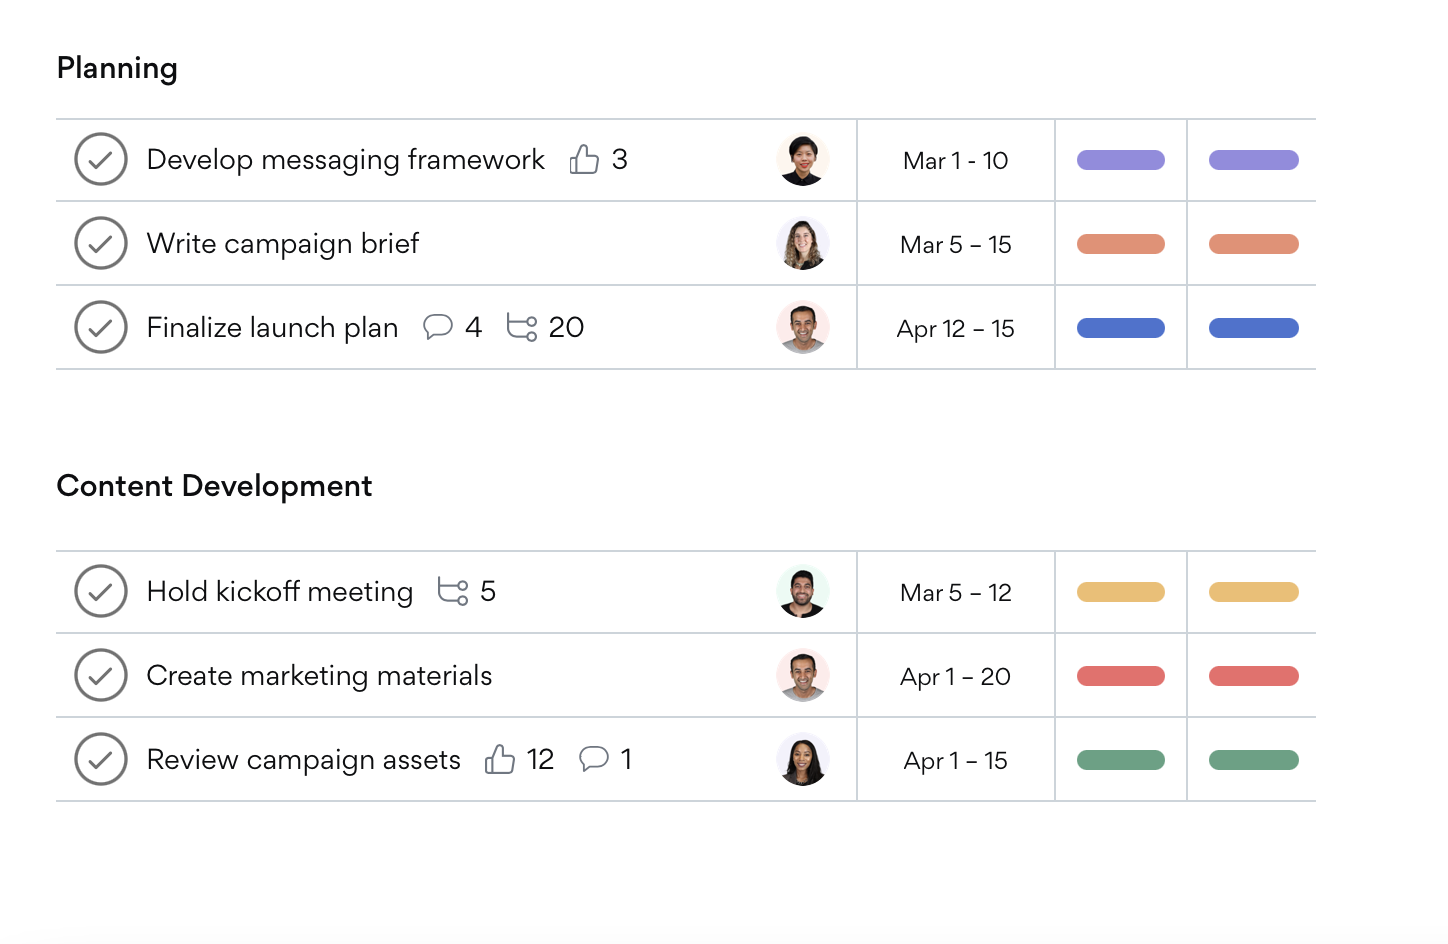 Asana is a project management tool that allows you to manage and track your work and tasks. It offers workflow management and reporting features to help all types of users stay collaborative and productive.